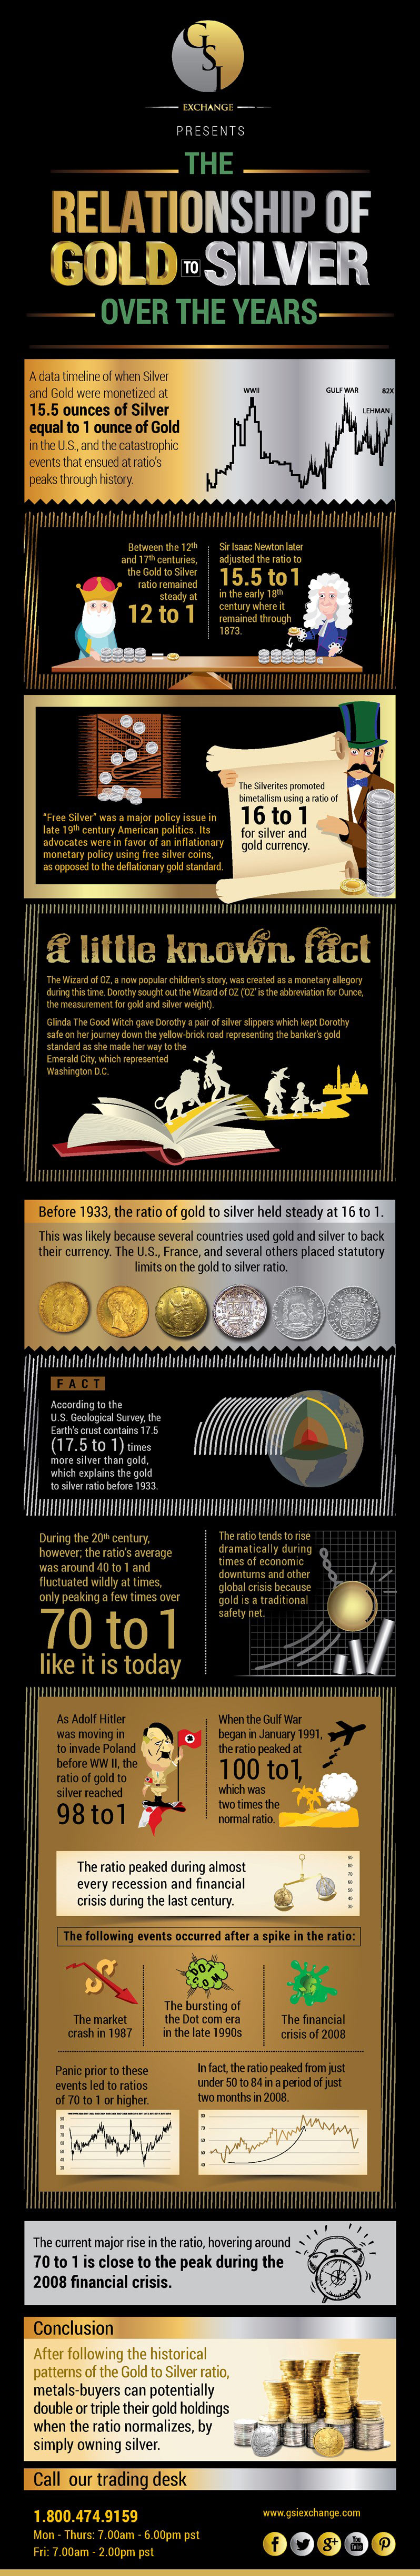 The relationship of Gold to Silver over the Years